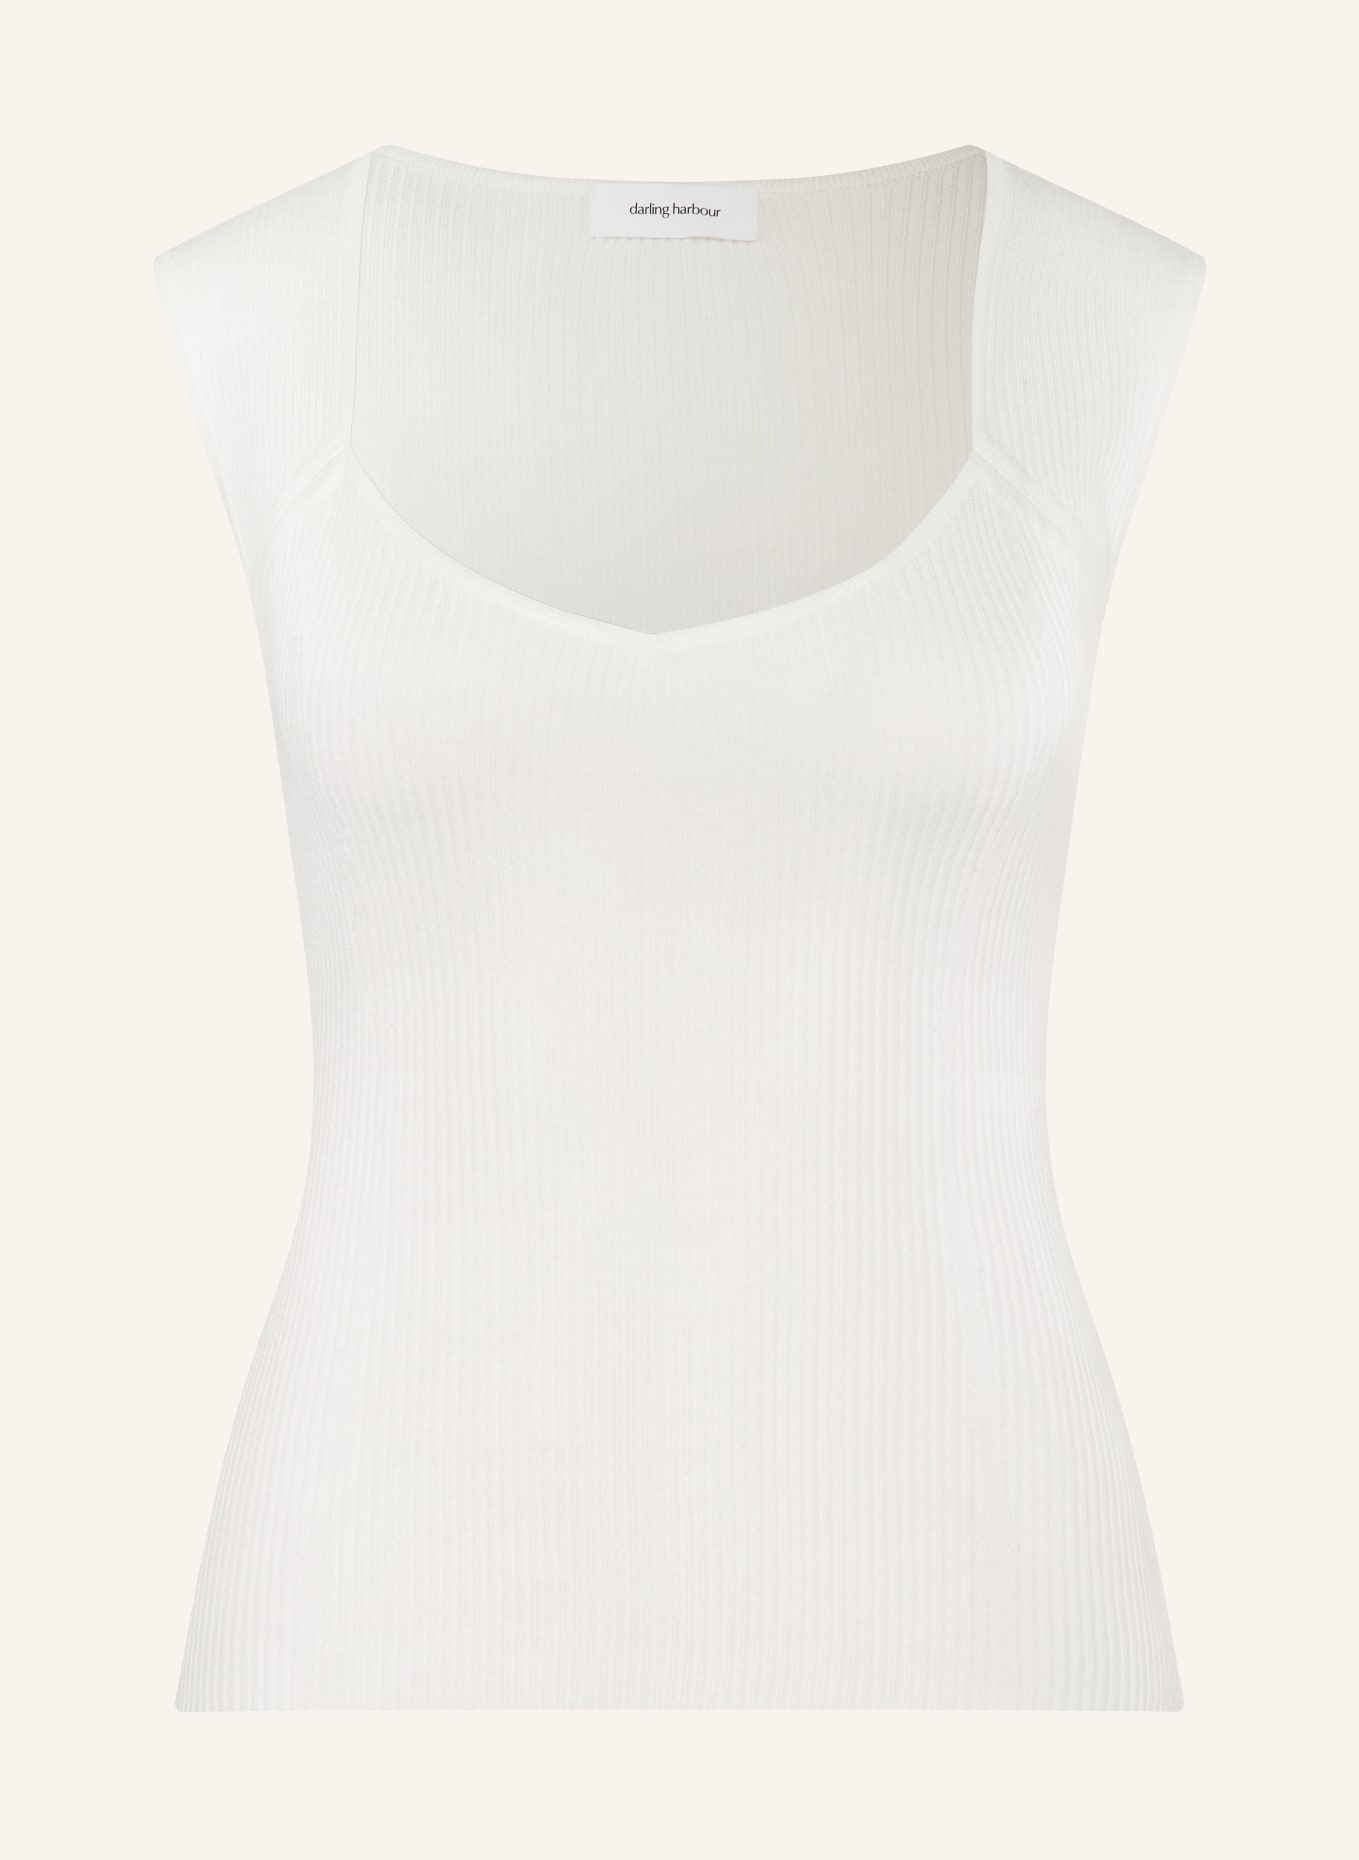 darling harbour Knit top, Color: WHITE (Image 1)